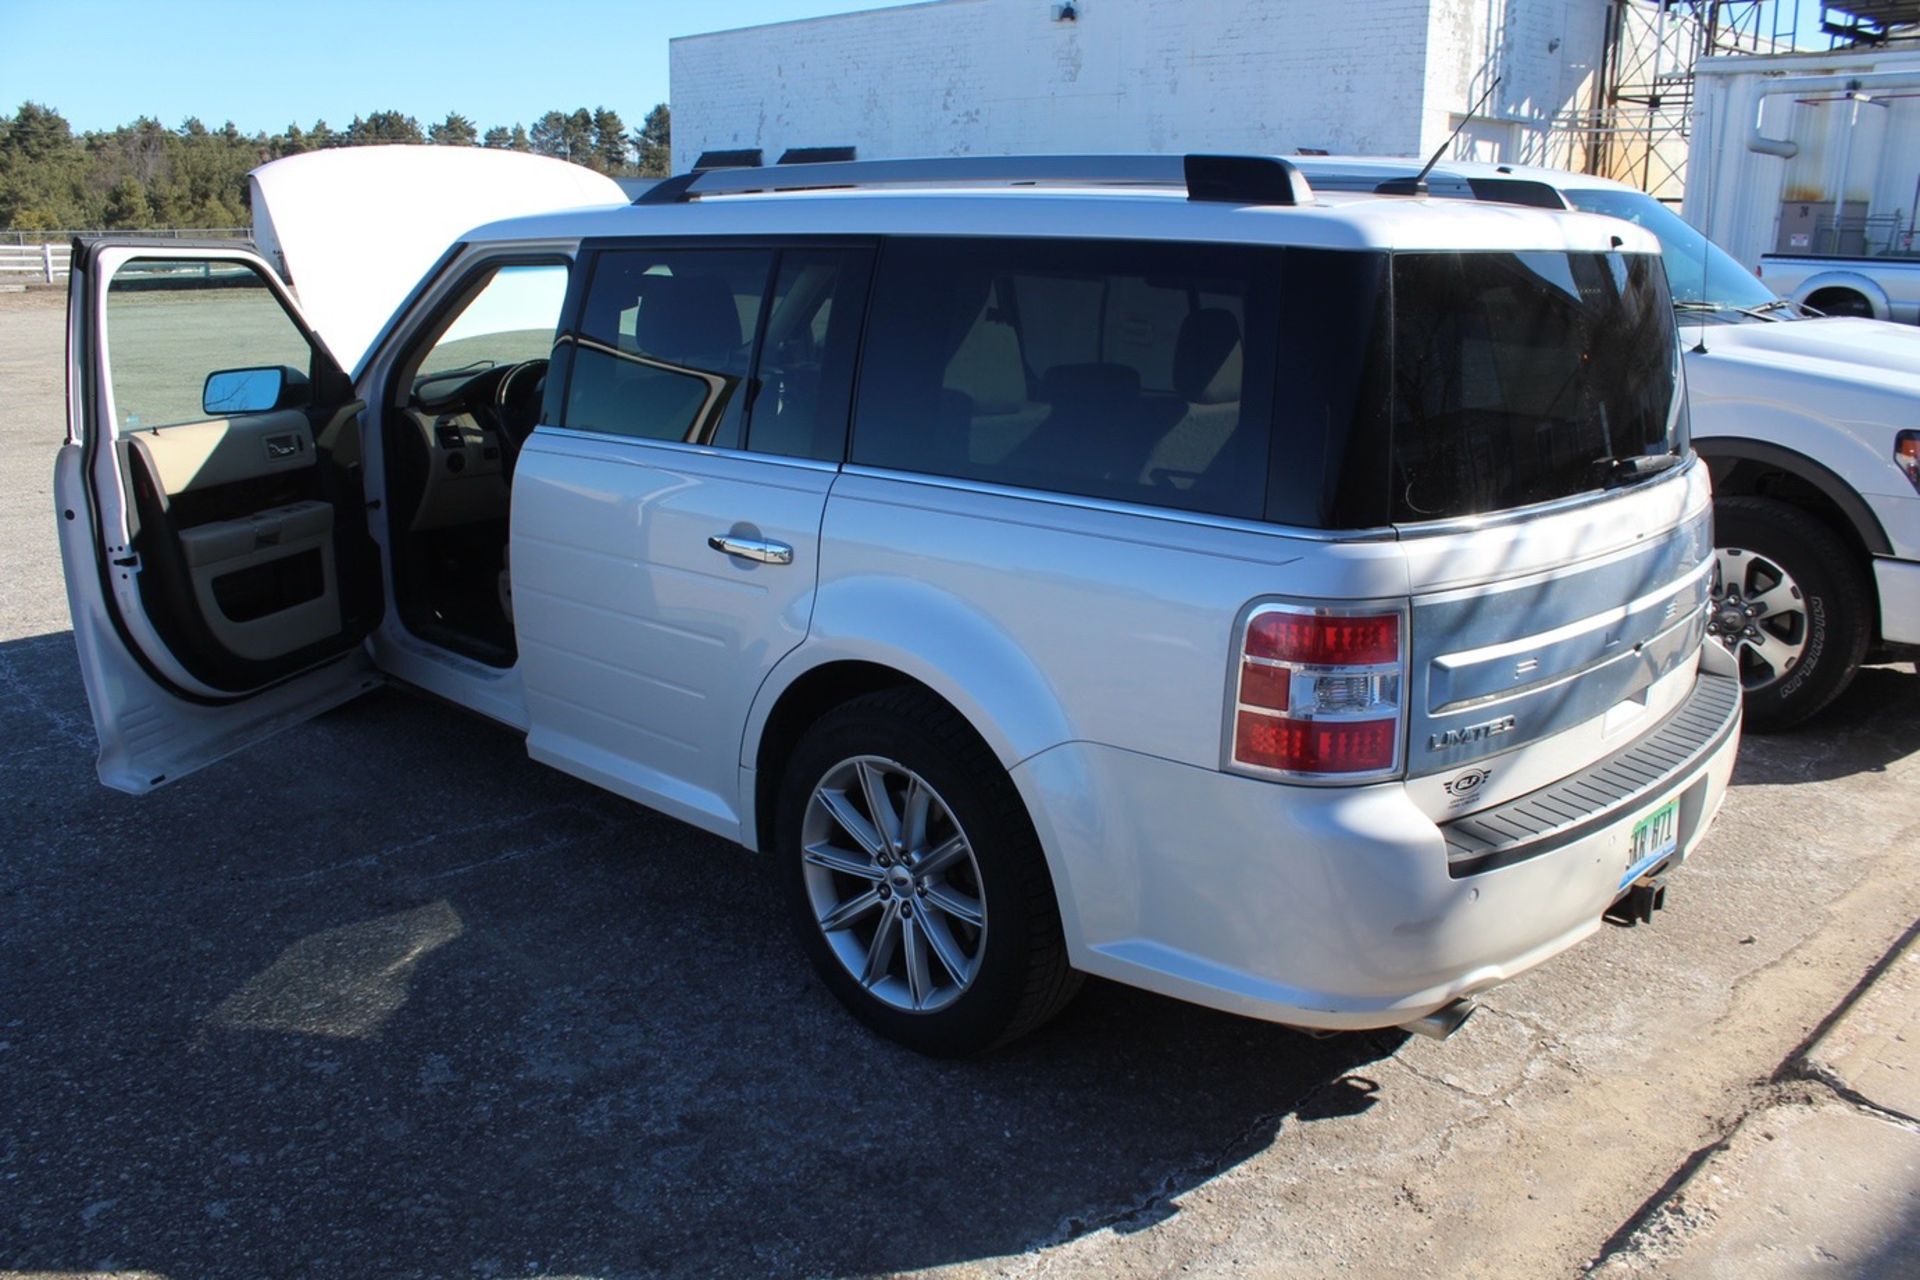 2012 Ford Flex Suv, VIN 2FMHK6D82DBD05452, Limited Package, AWD, 104,433 Mile | Rigging: Hand Carry - Image 6 of 7